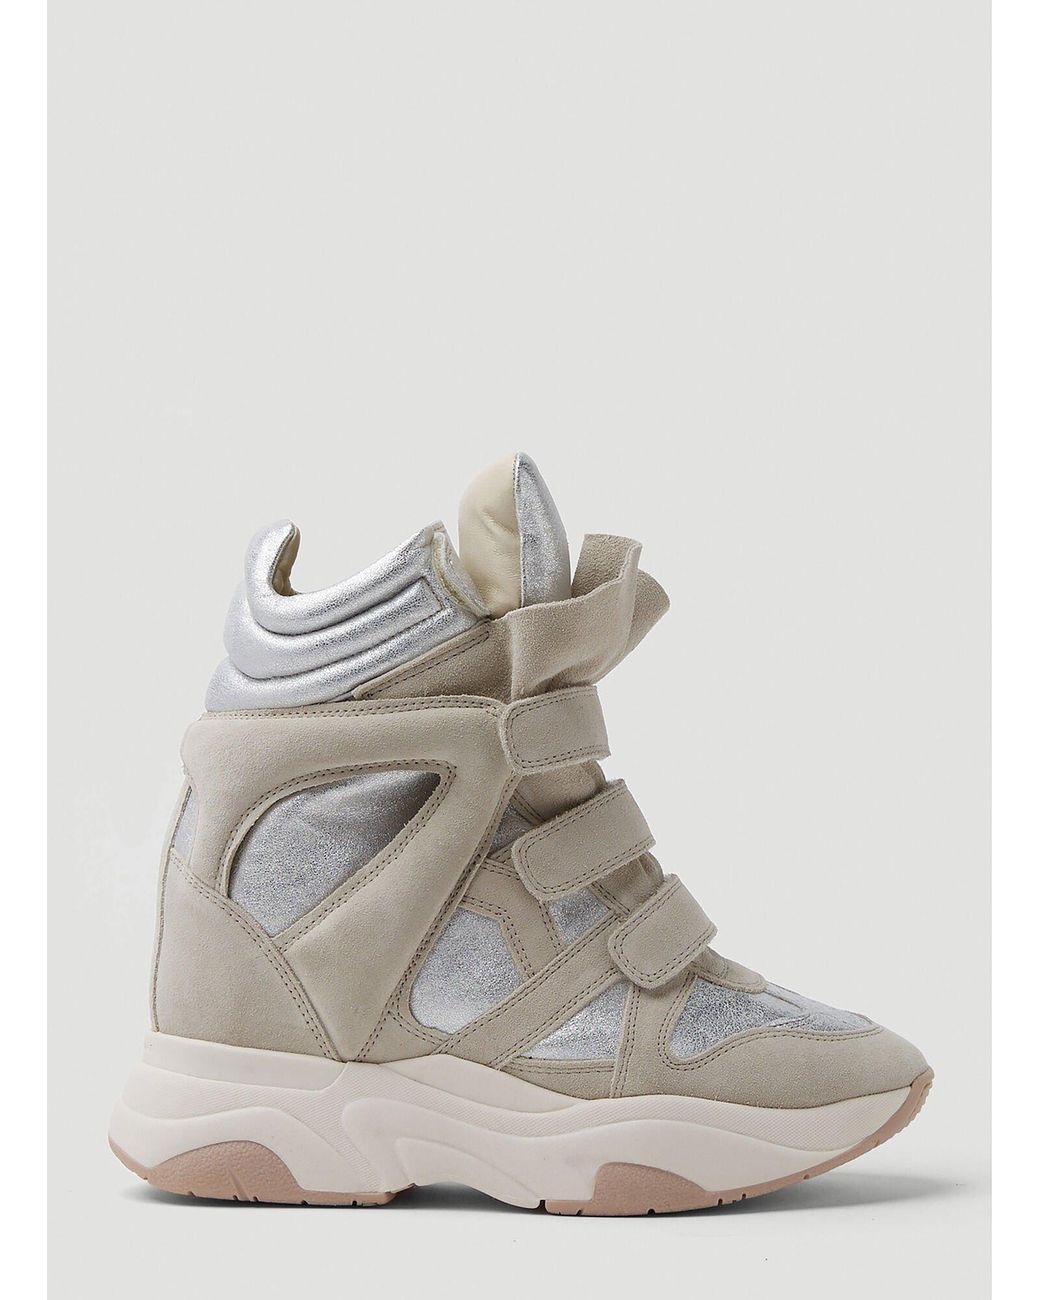 Isabel Marant Balskee High-top Sneakers in Gray | Lyst